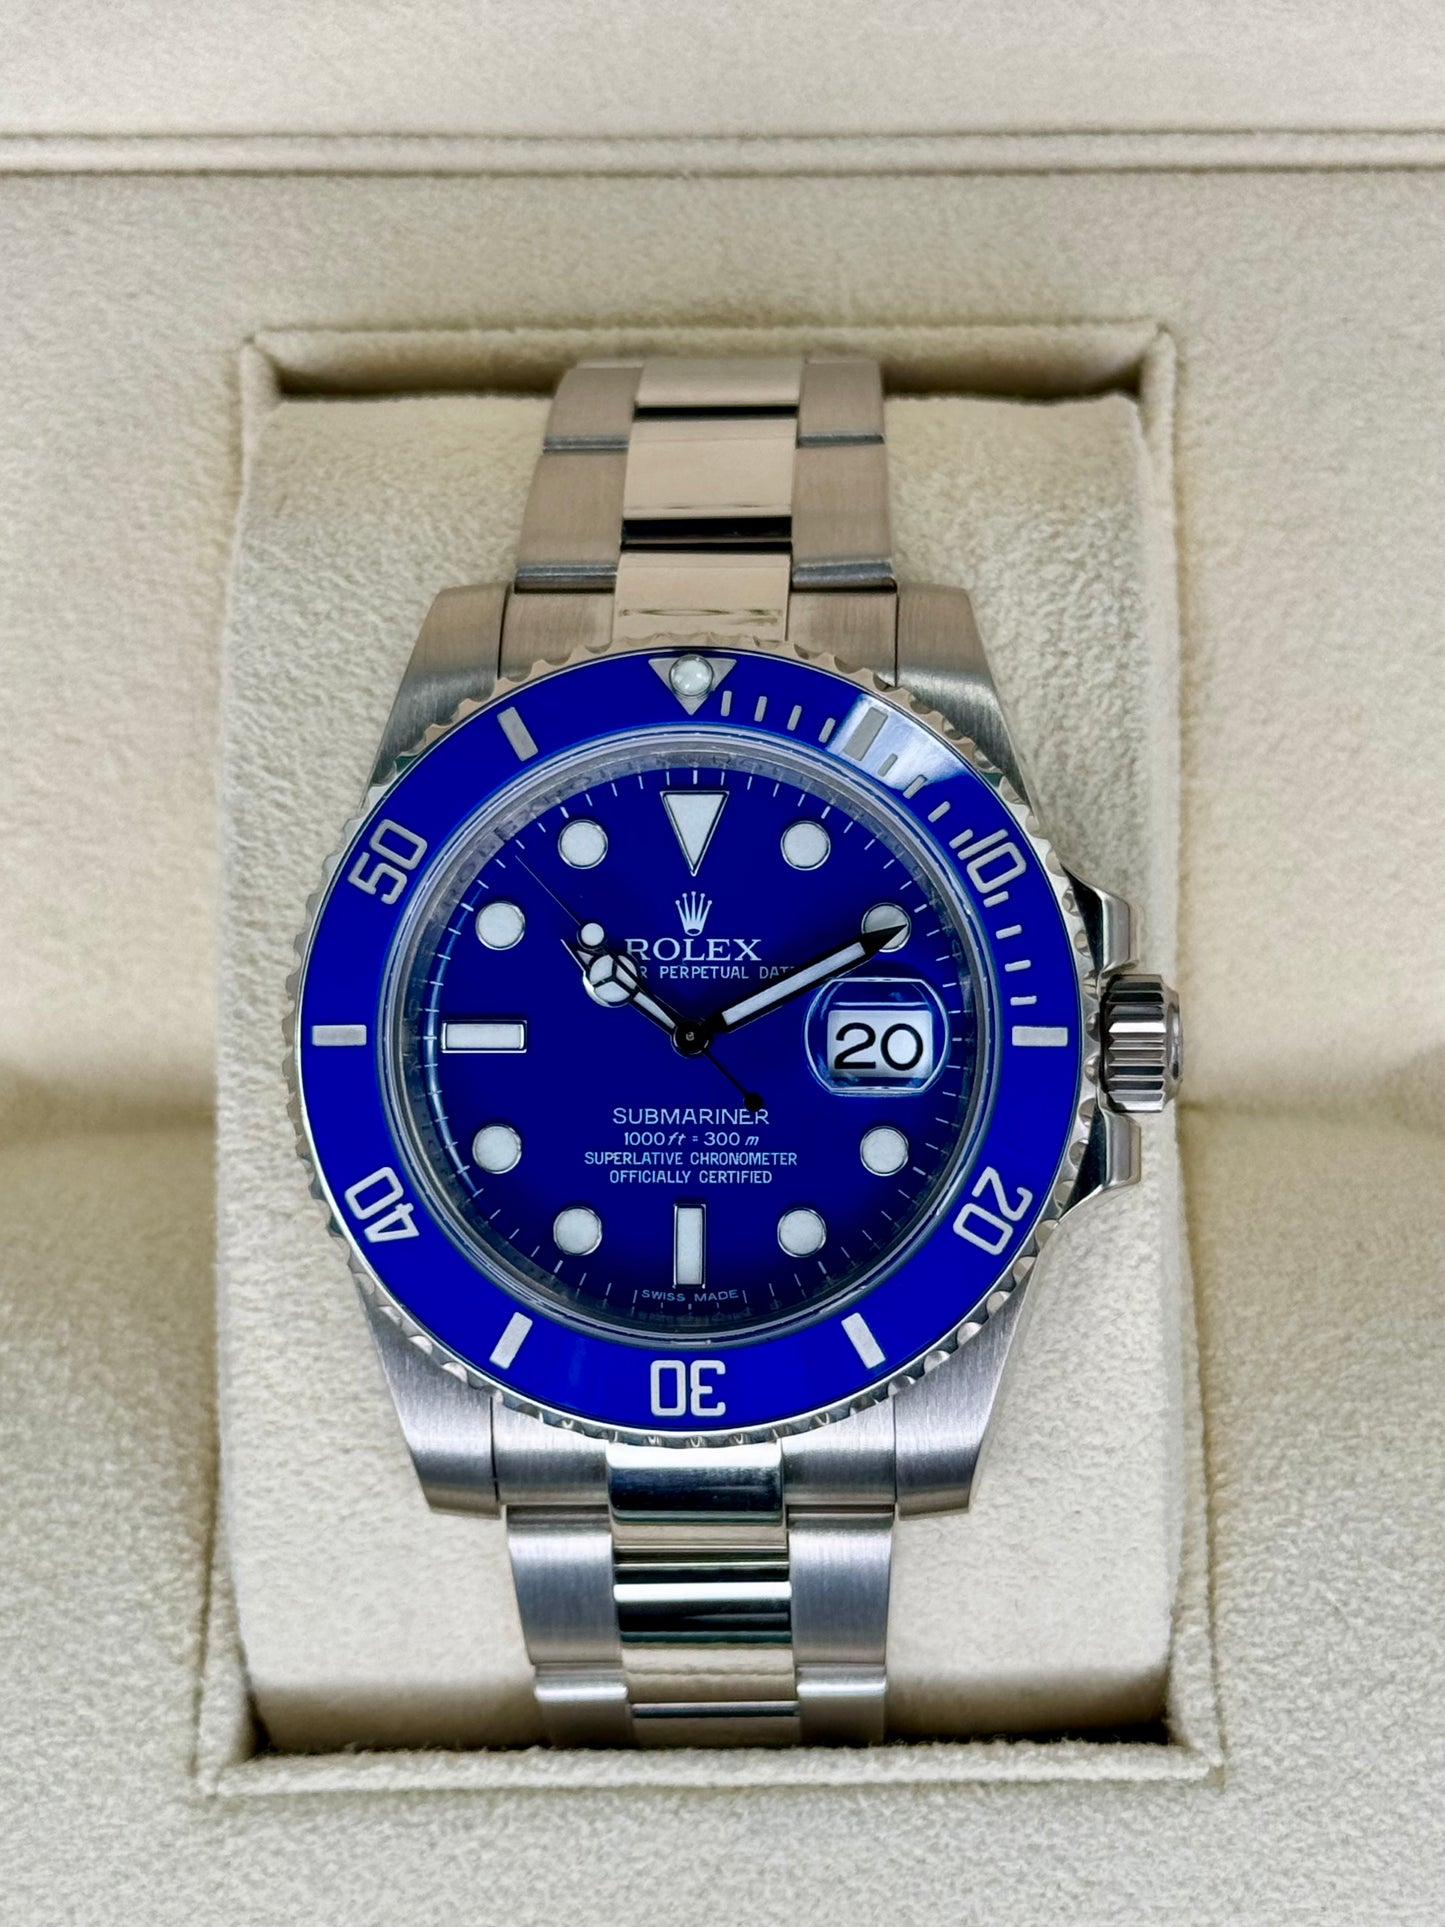 2012 Rolex Submariner Date "Smurf" 40mm 116619 White Gold Blue Dial - MyWatchLLC